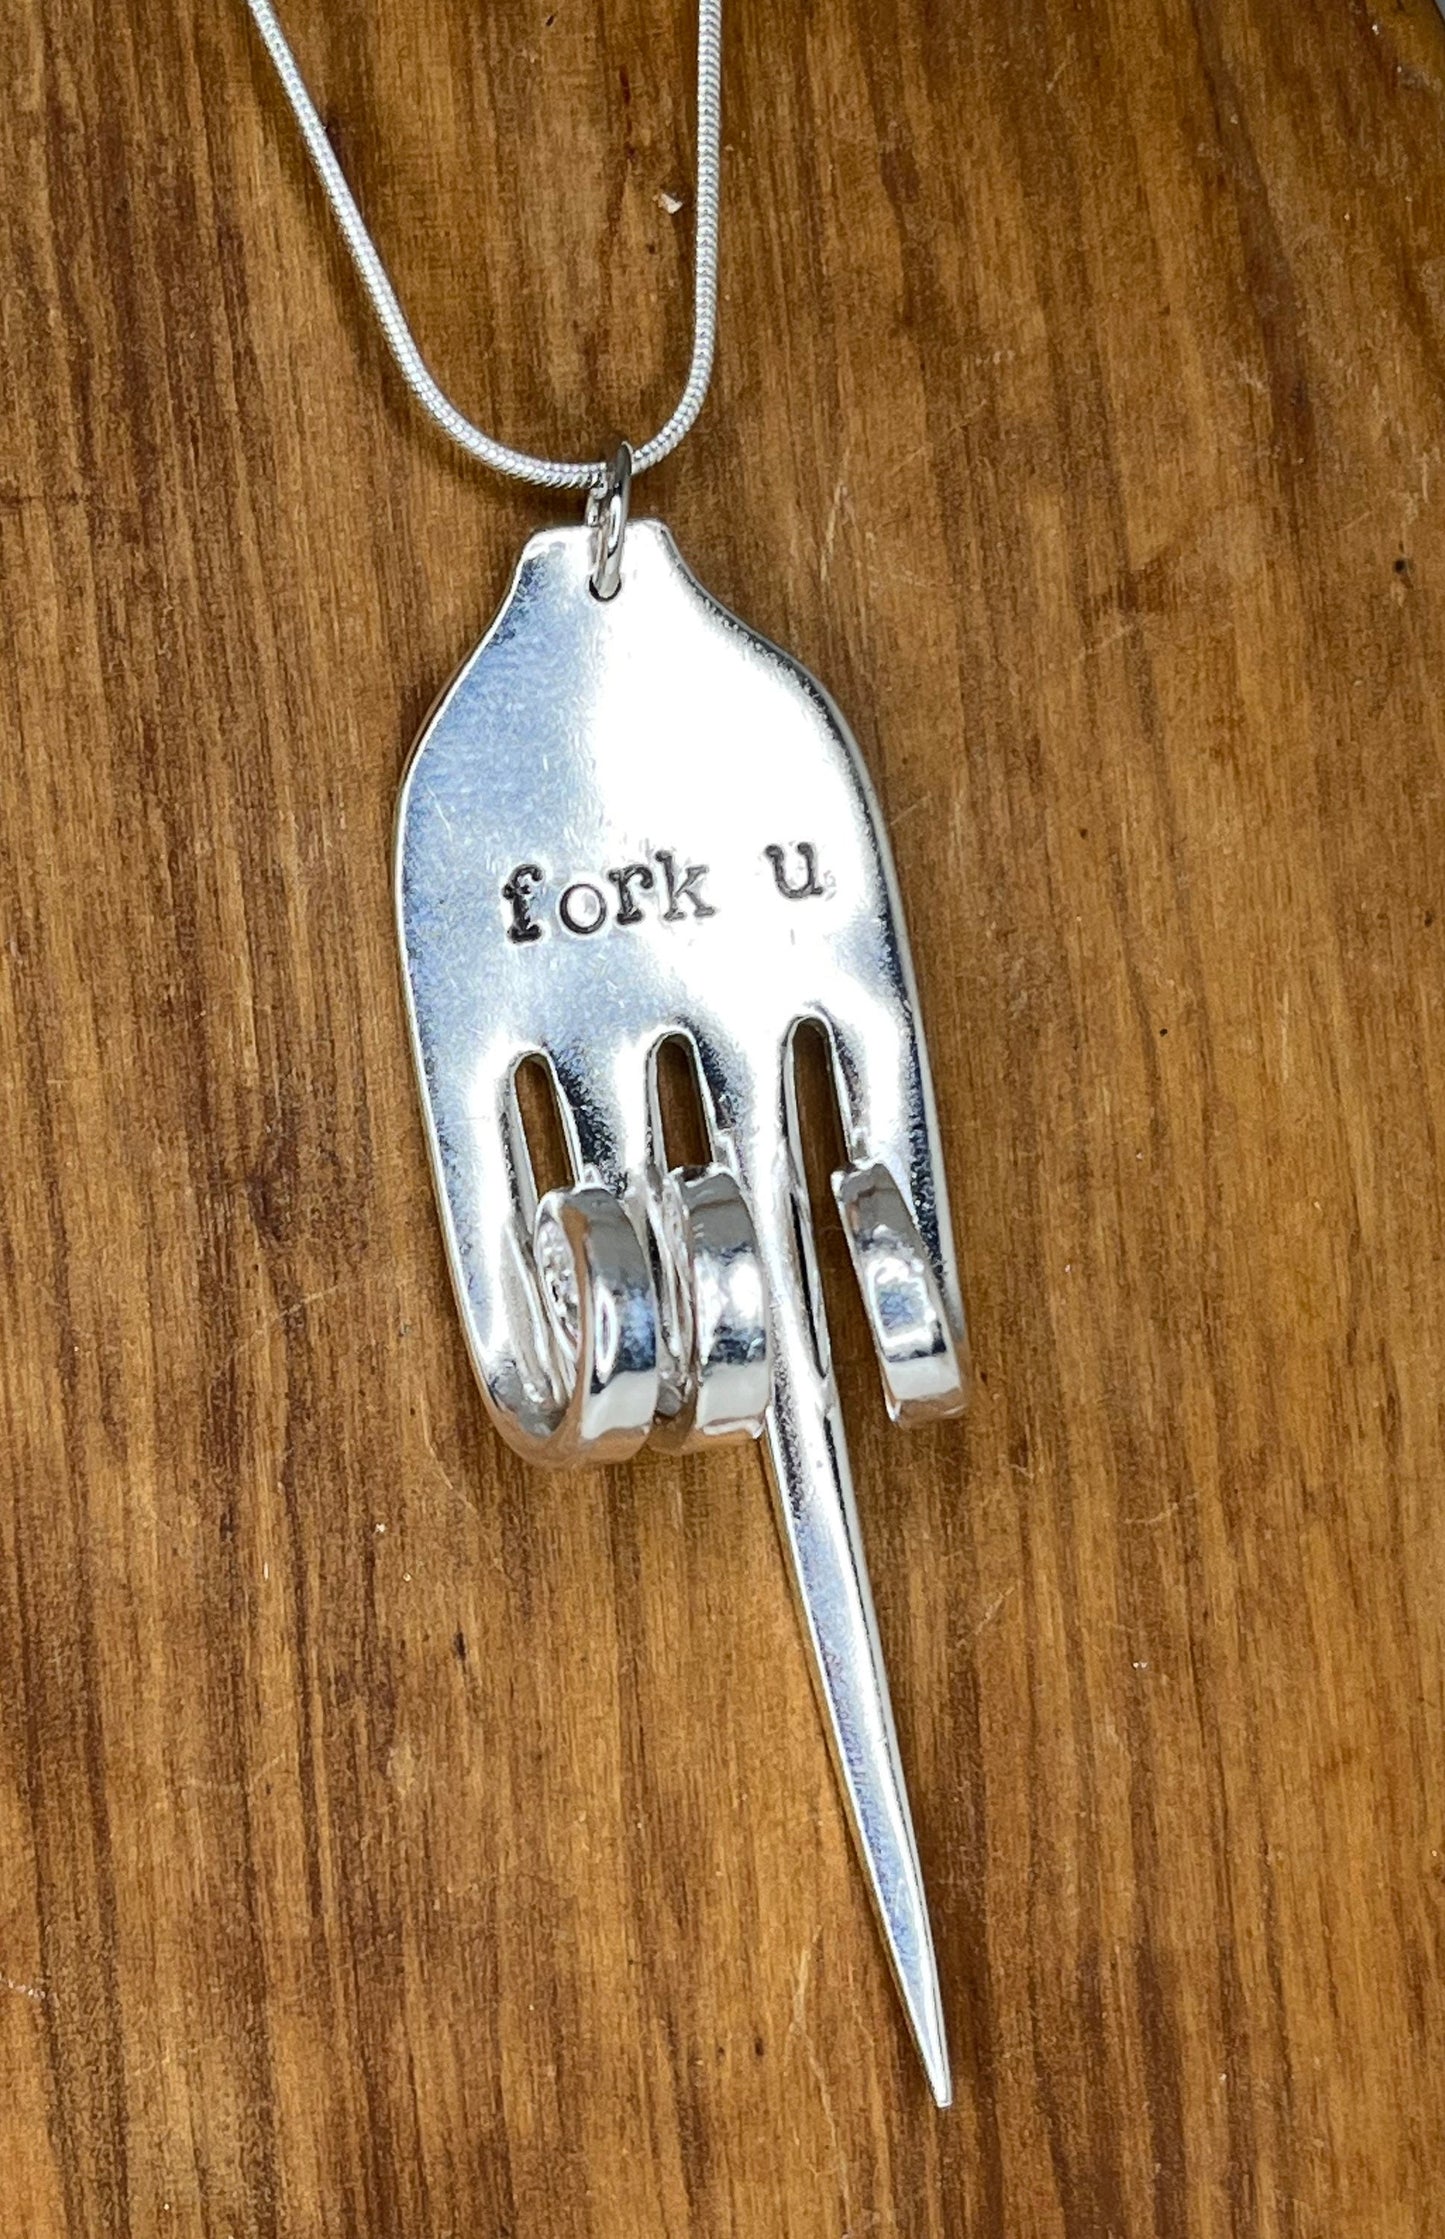 Fork You fork pendant made from vintage silver plated silverware. Gift for friend. Unique pendant. Fork you.